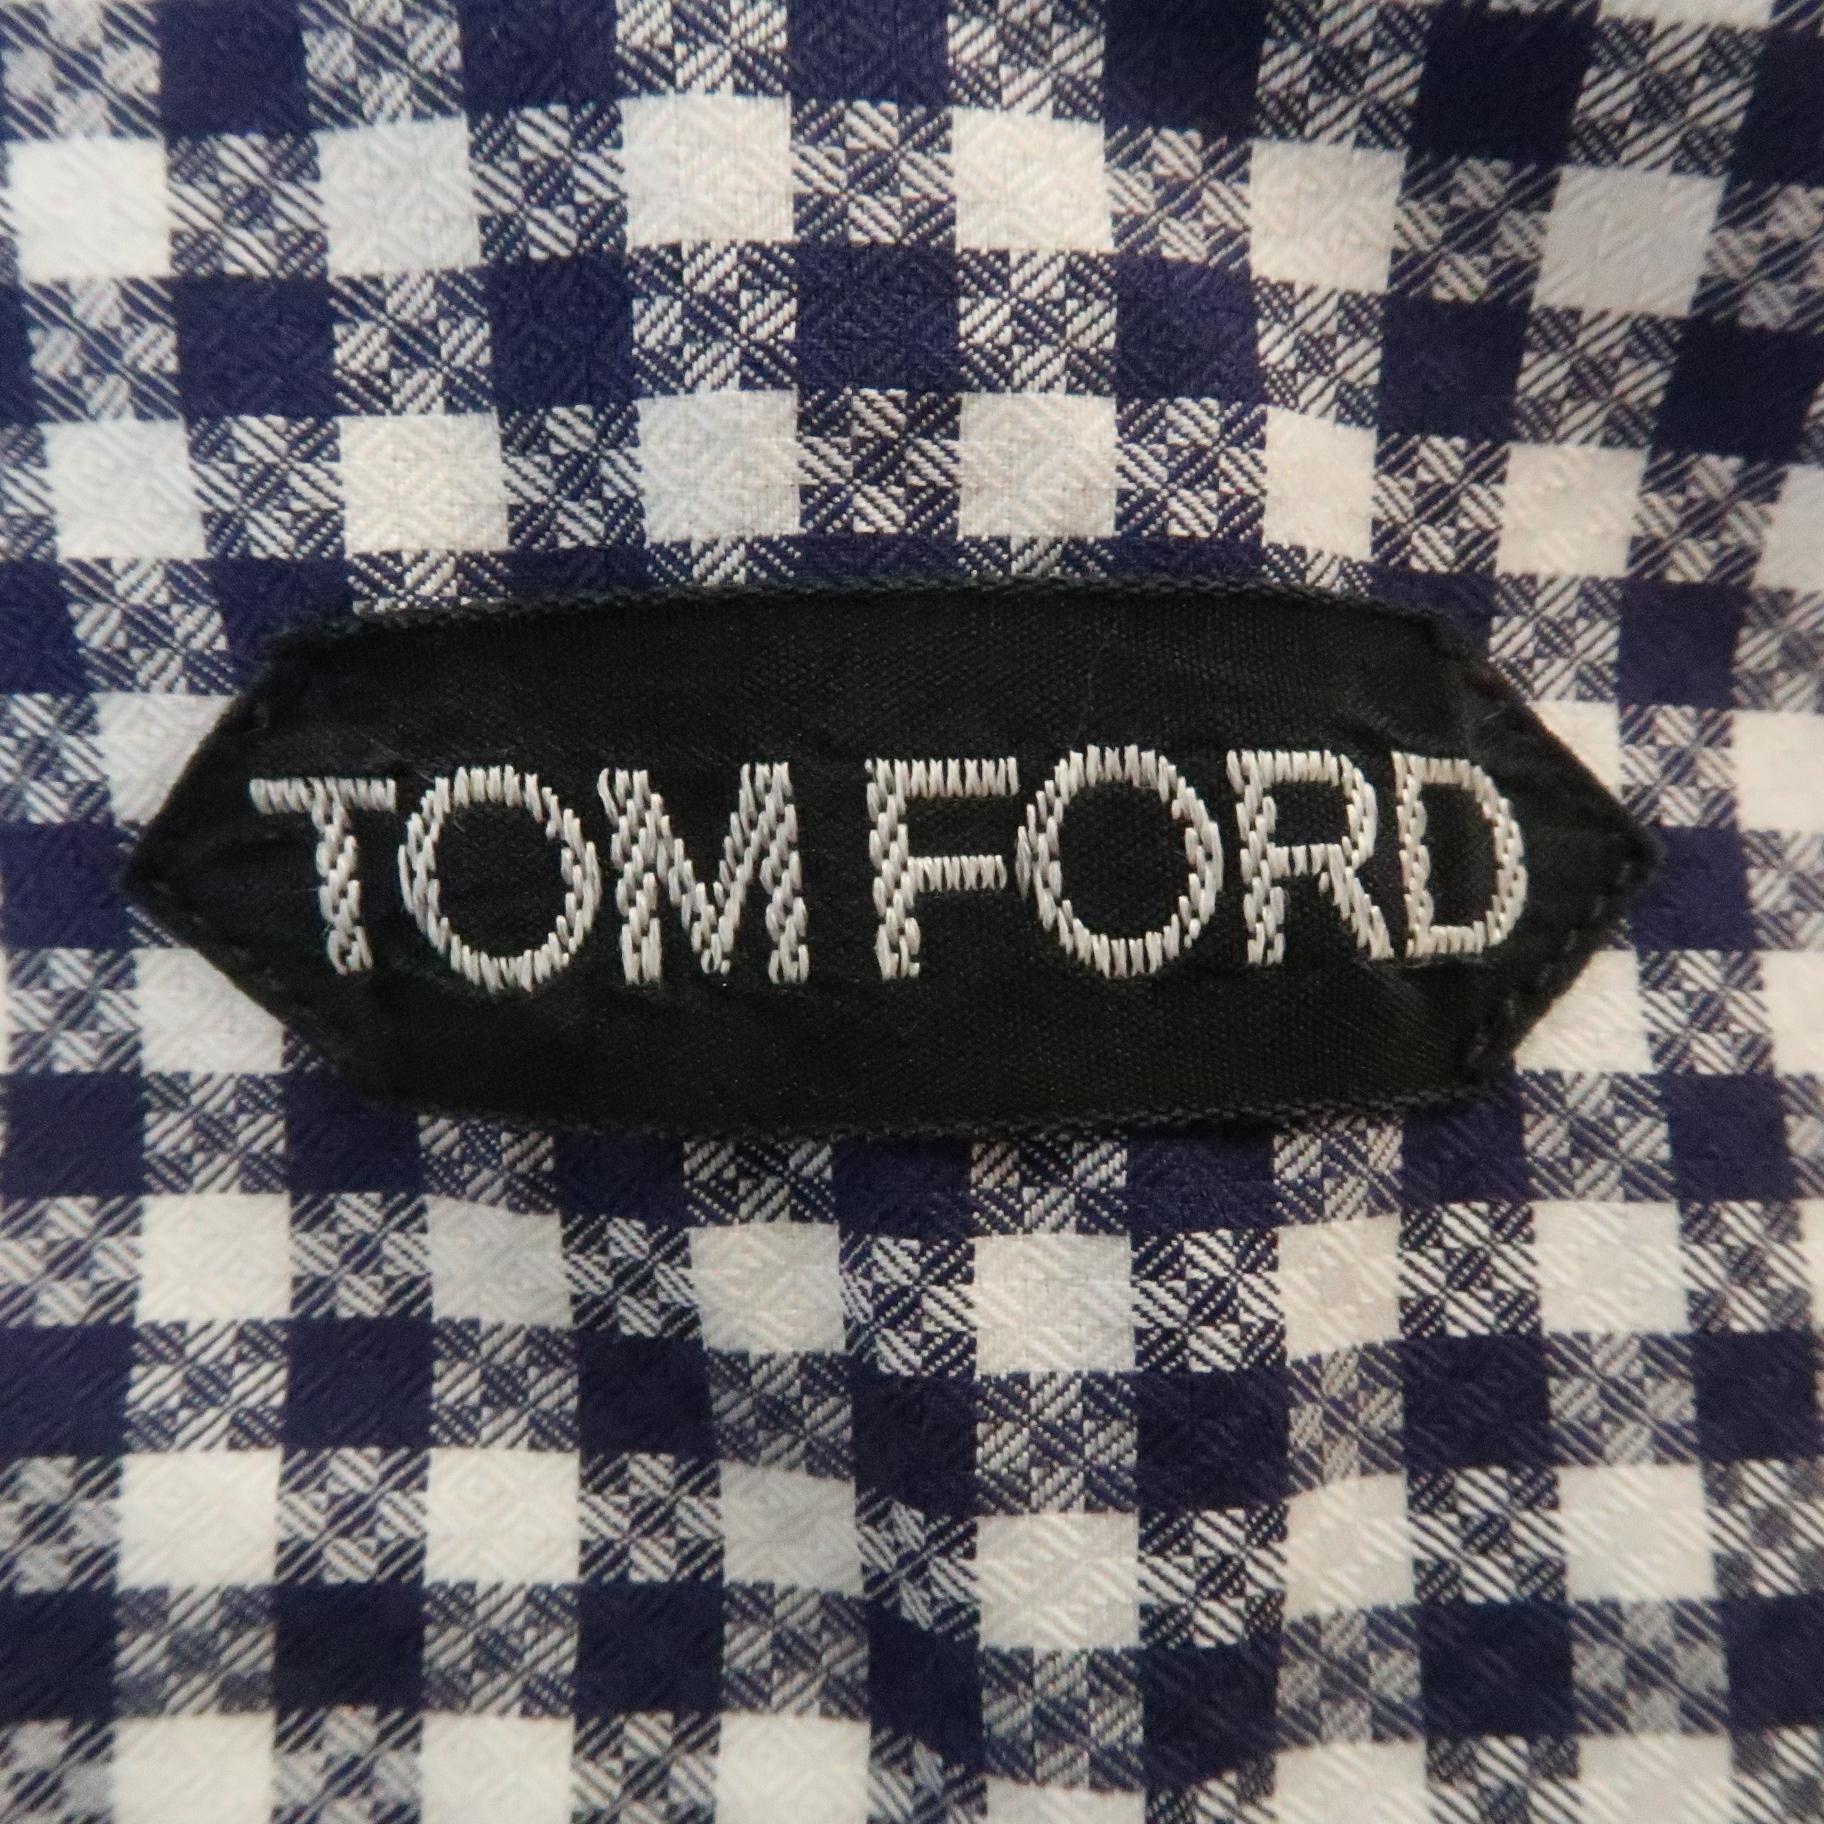 Men's  TOM FORD Size L Navy & White Plaid Cotton Button Up Long Sleeve Shirt